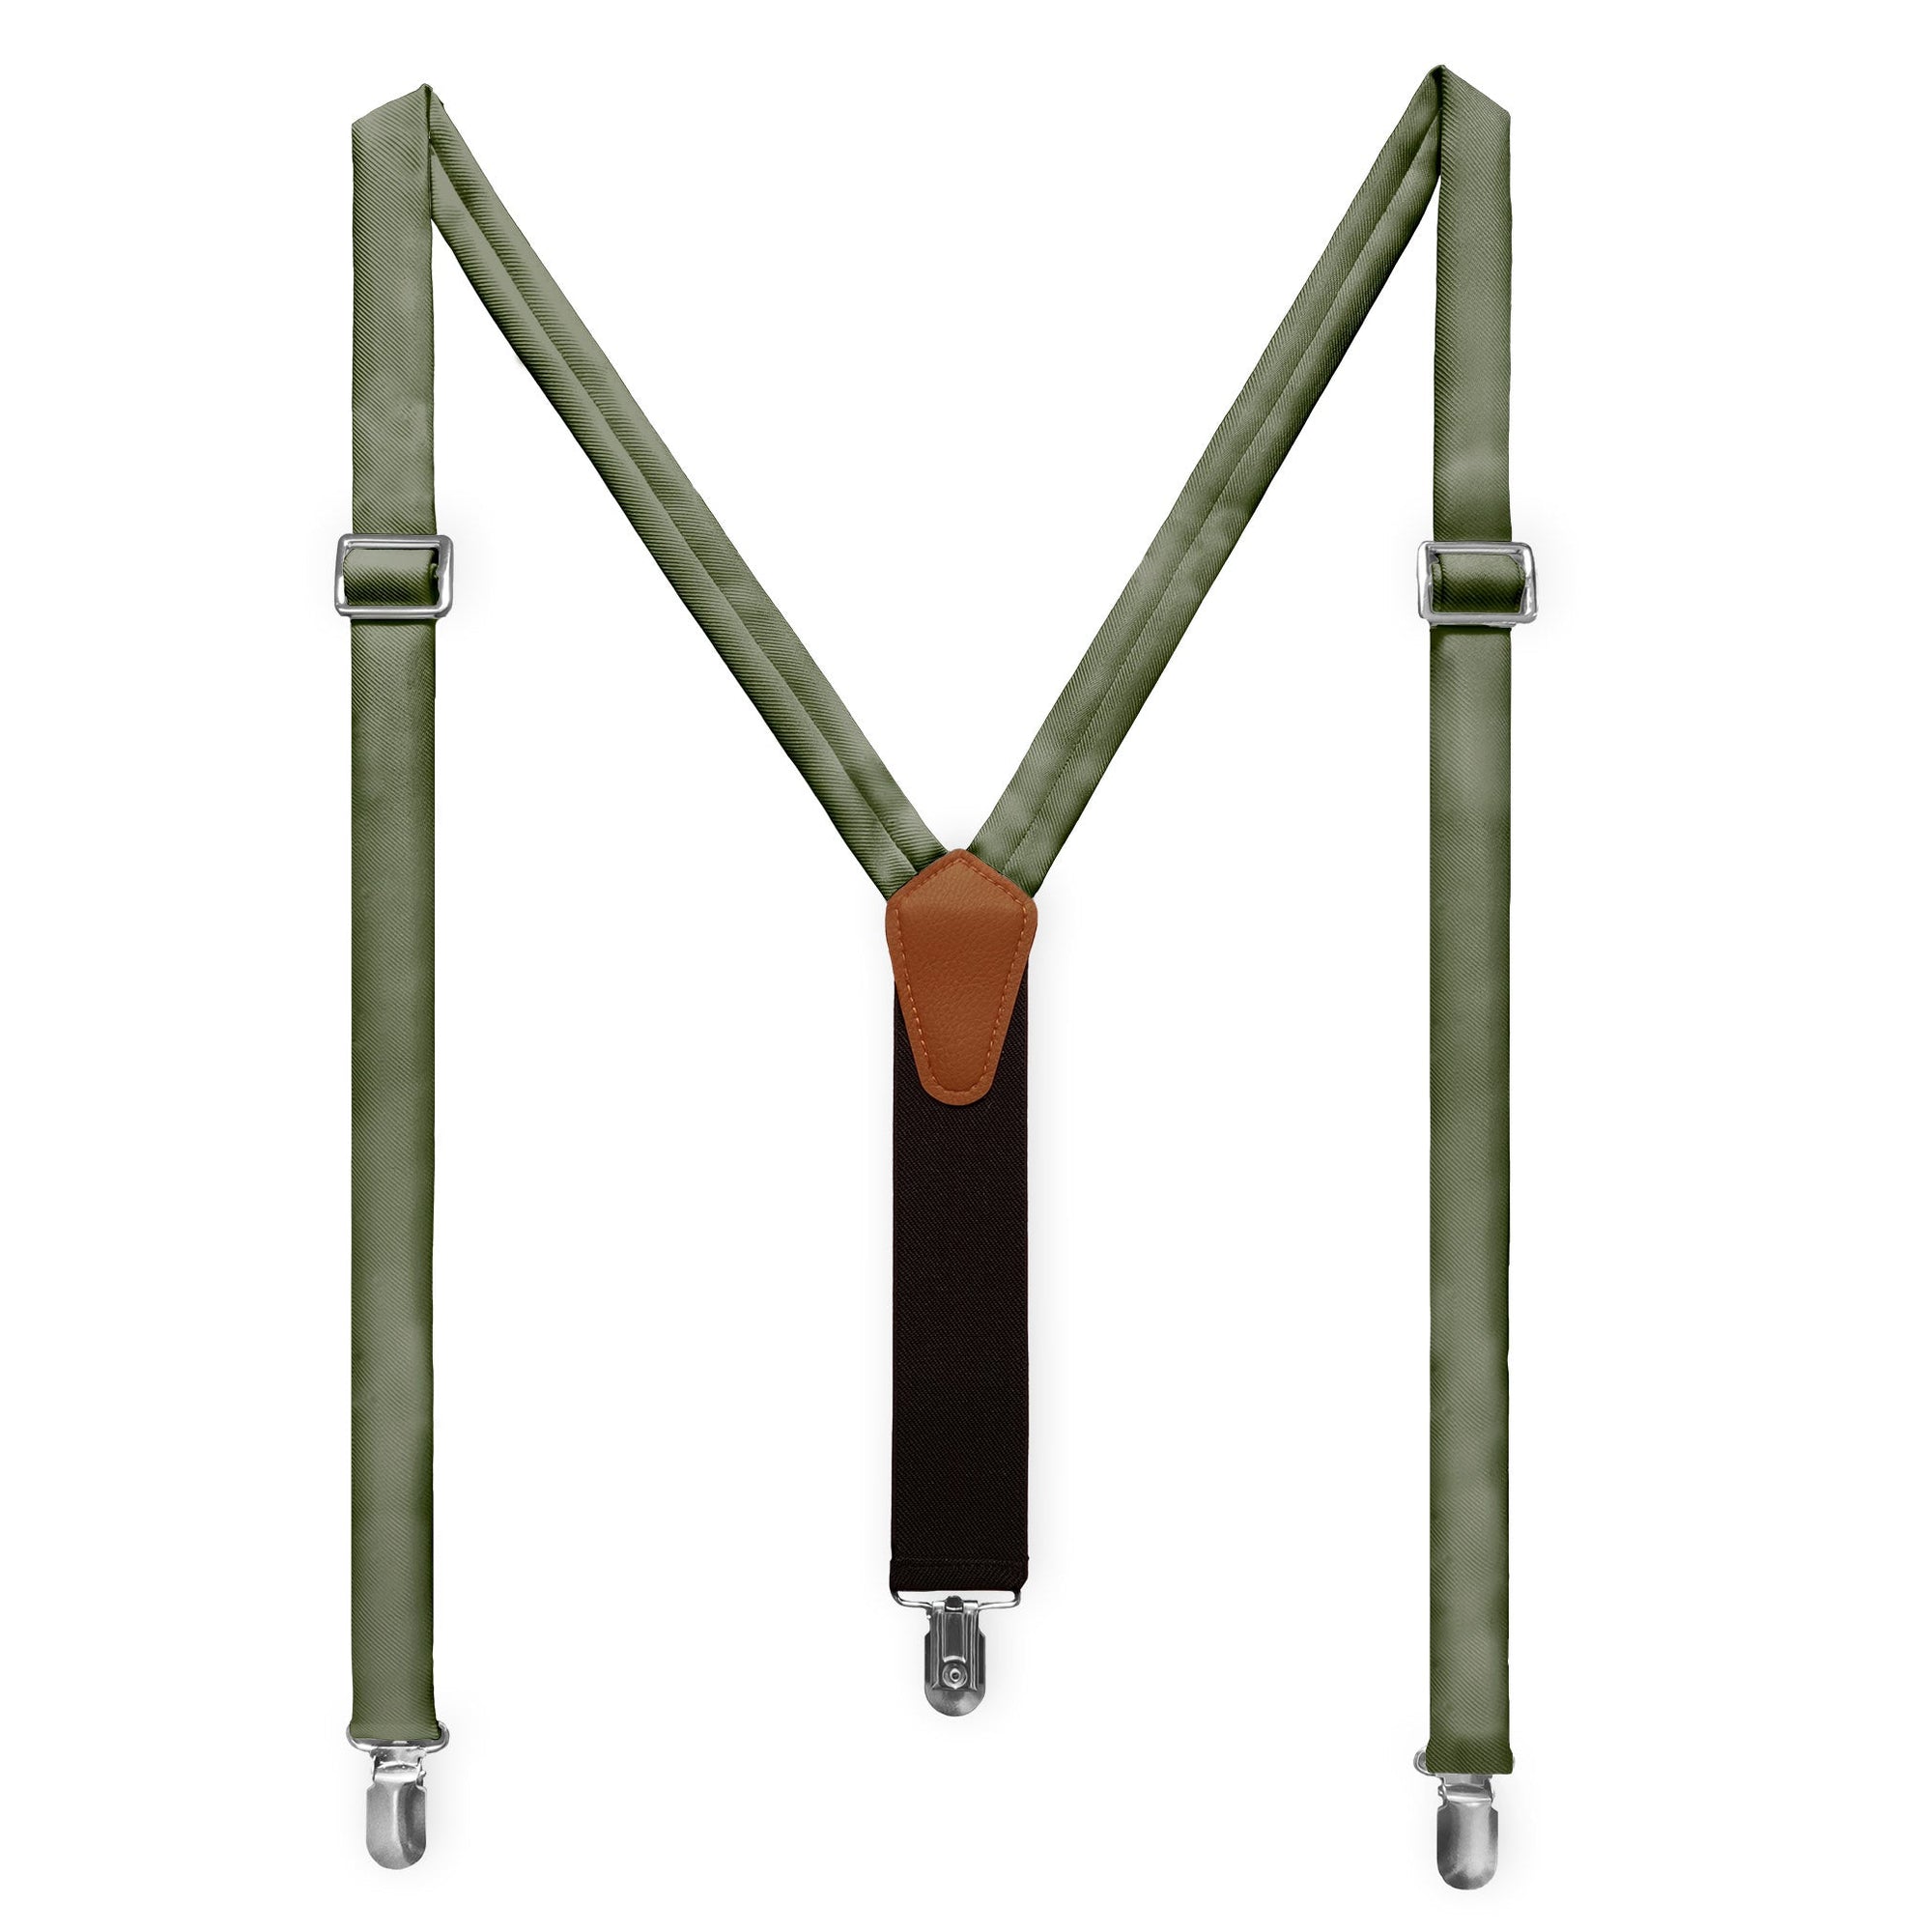 Azazie Olive Suspenders - Adult Short 36-40" -  - Knotty Tie Co.